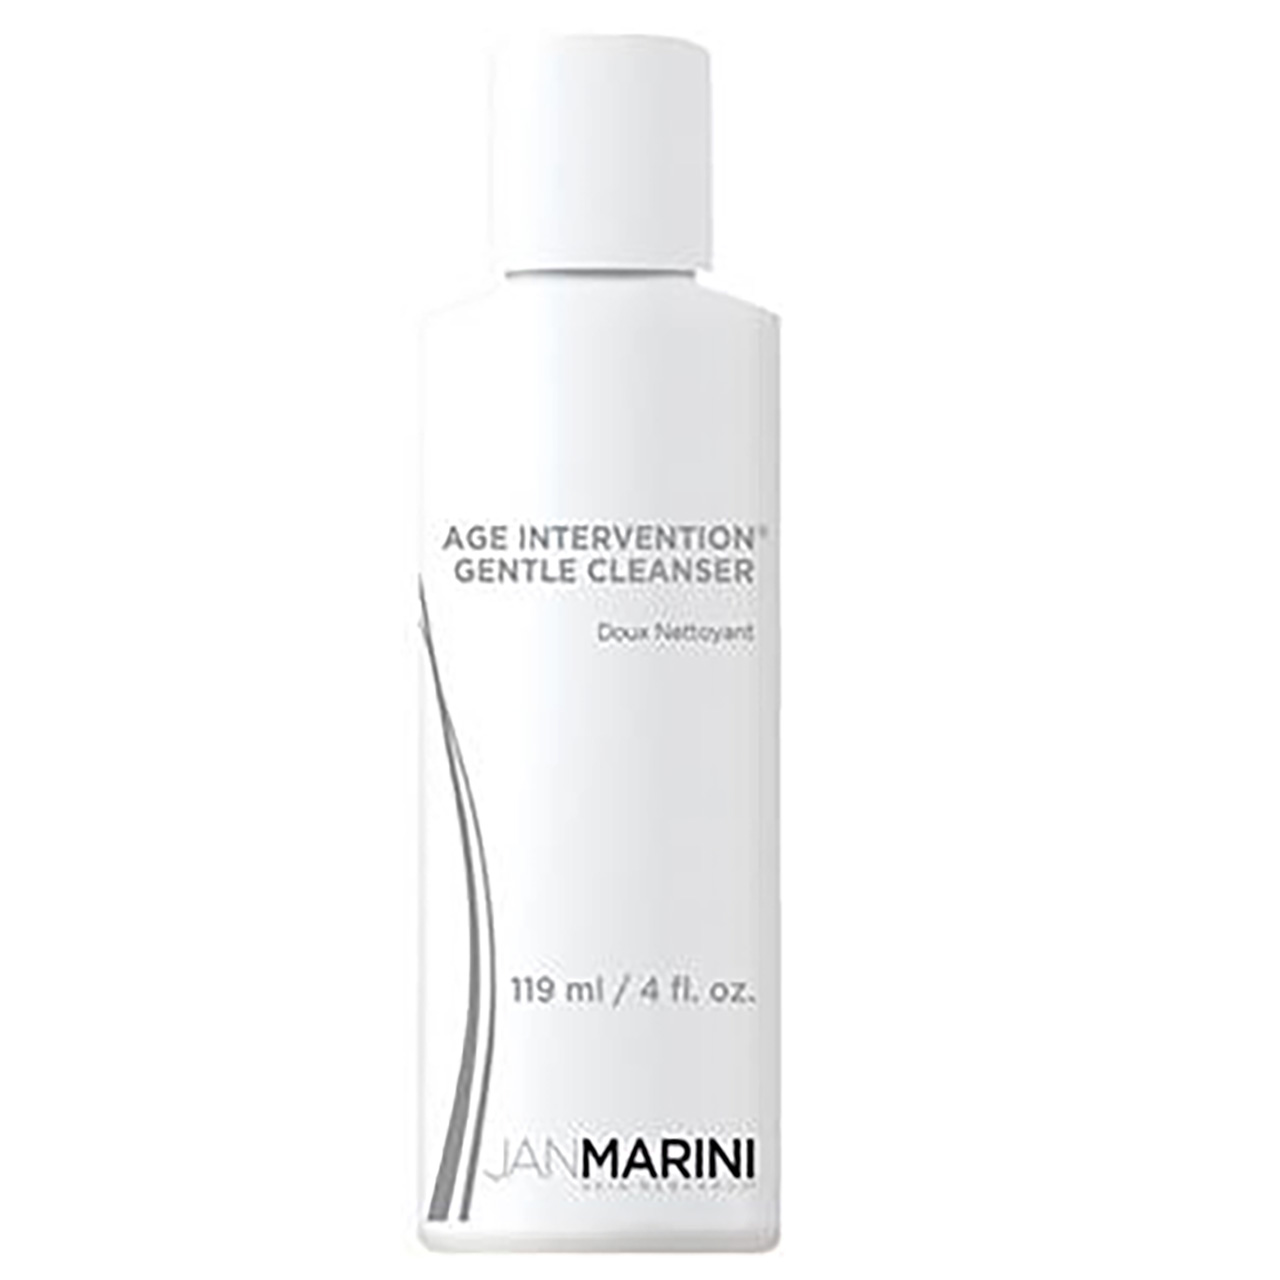 Jan Marini Age Intervention Gentle Cleanser - 4 oz (A0137.1) Questions & Answers